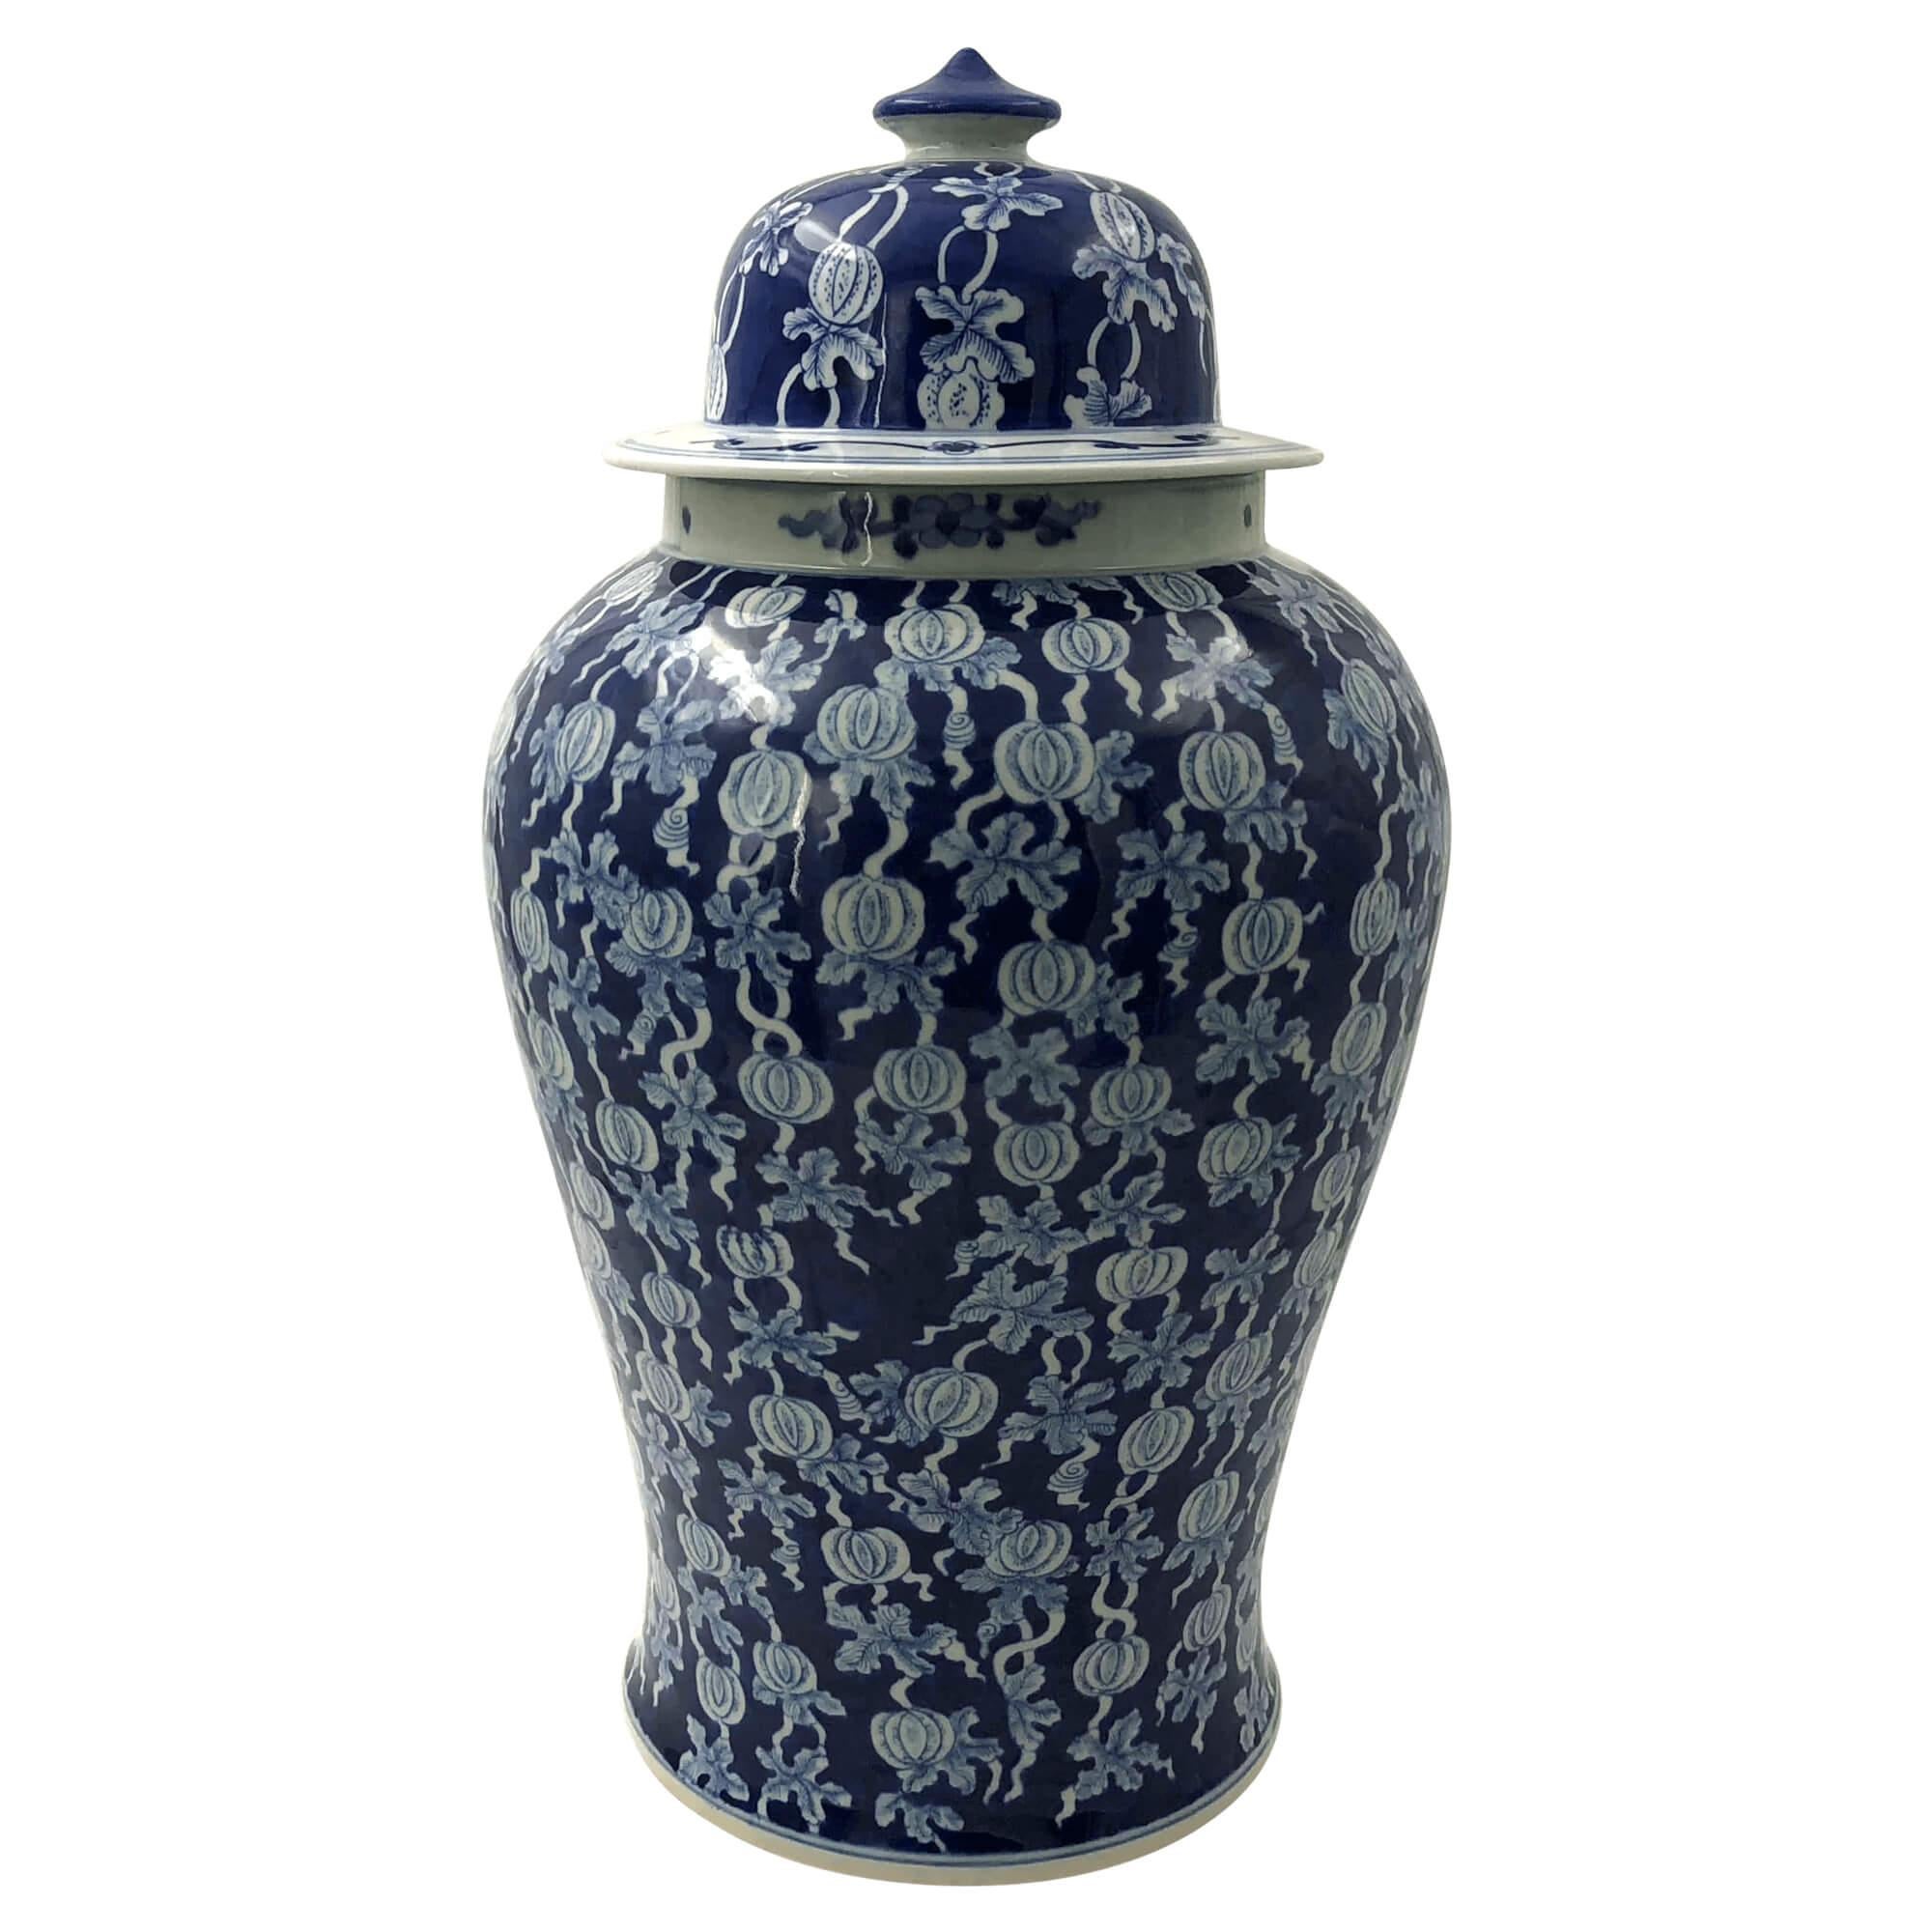 Large hand-painted Vintage style Chinese export blue and white lidded ginger jars decorated floral fruit.

Dimensions: 13